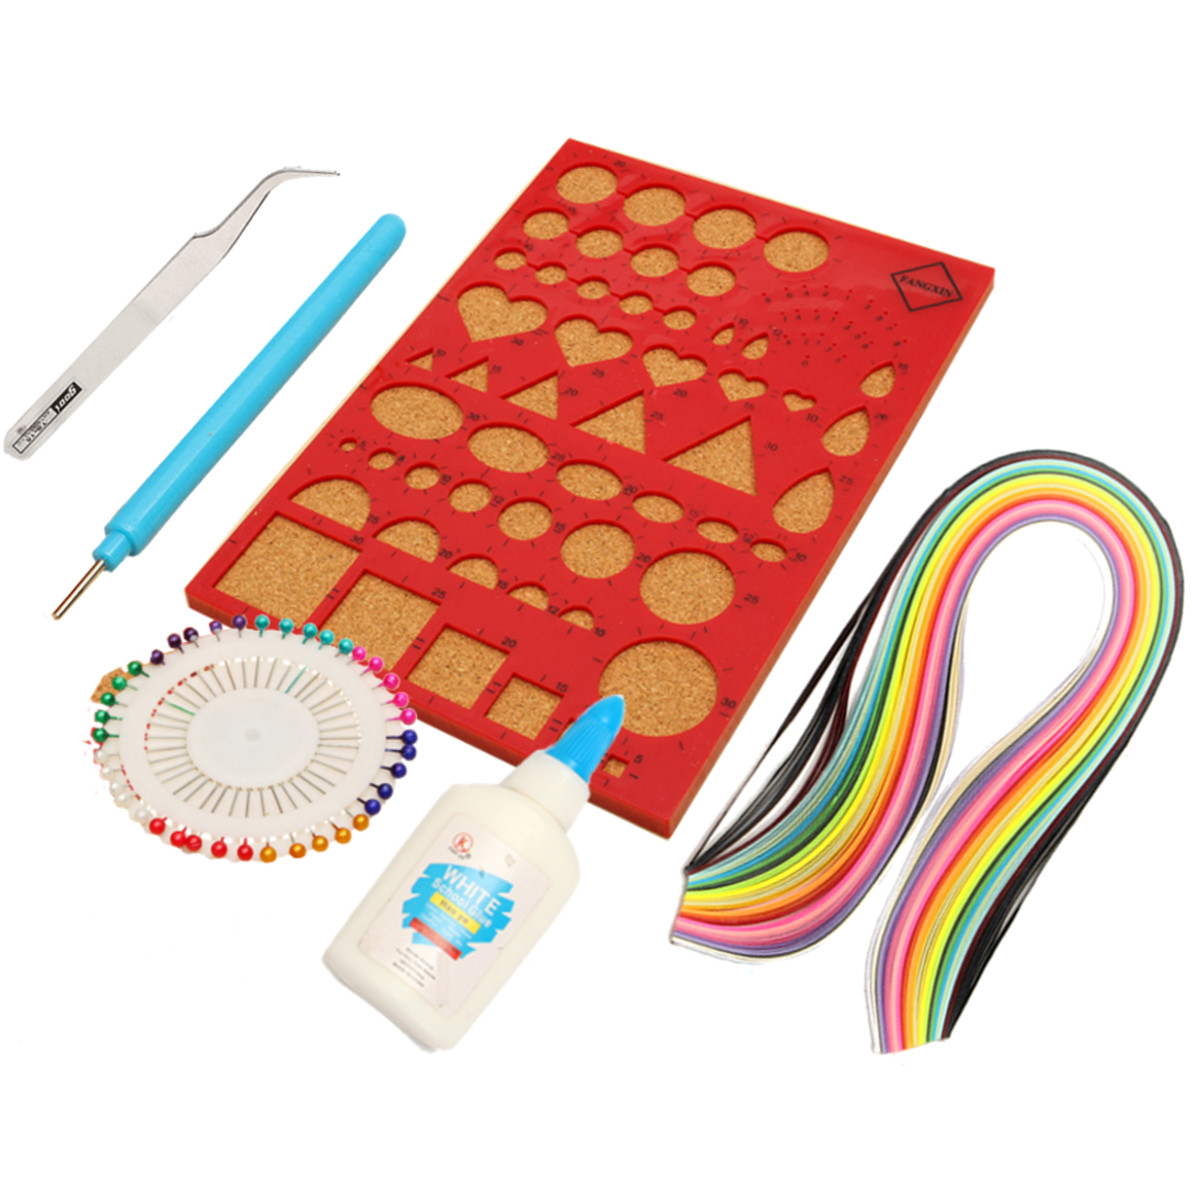 1-Set-Creations-Paper-Quilling-Kit-Slotted-Tools-Pins-Tweezer-Board-DIY-Craft-1065951-3